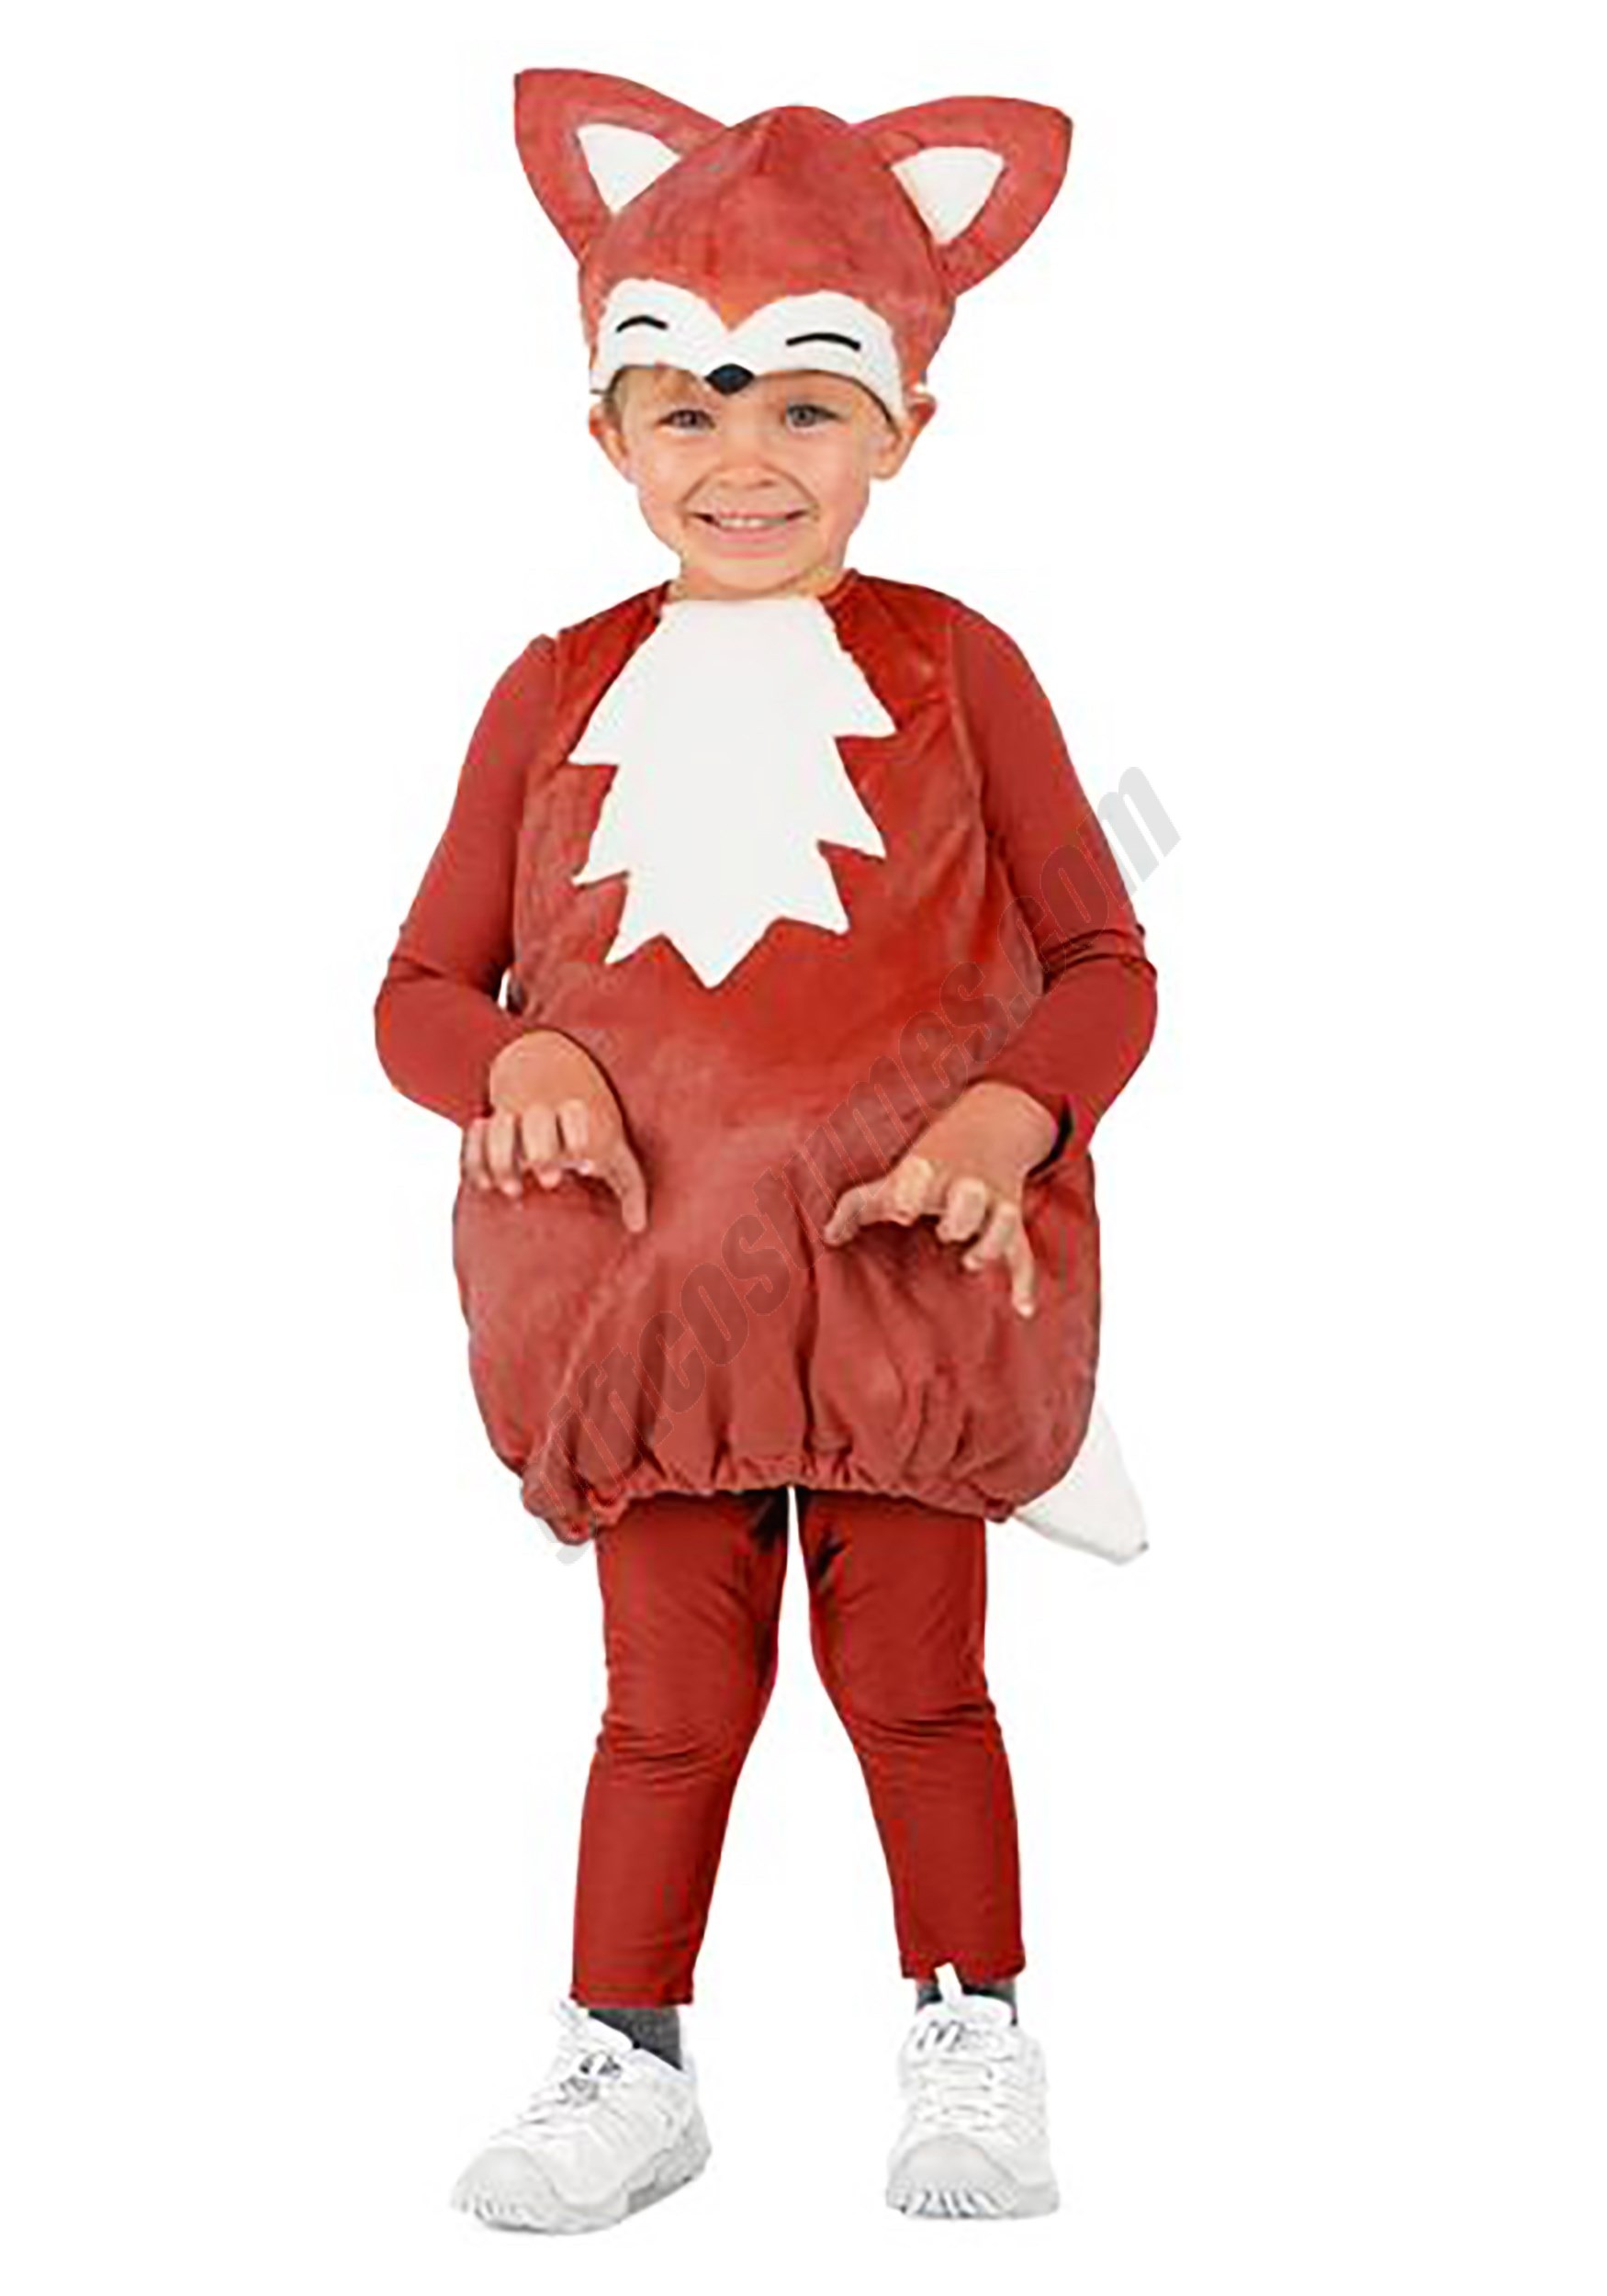 Freddy the Fox Costume for Toddlers Promotions - Freddy the Fox Costume for Toddlers Promotions